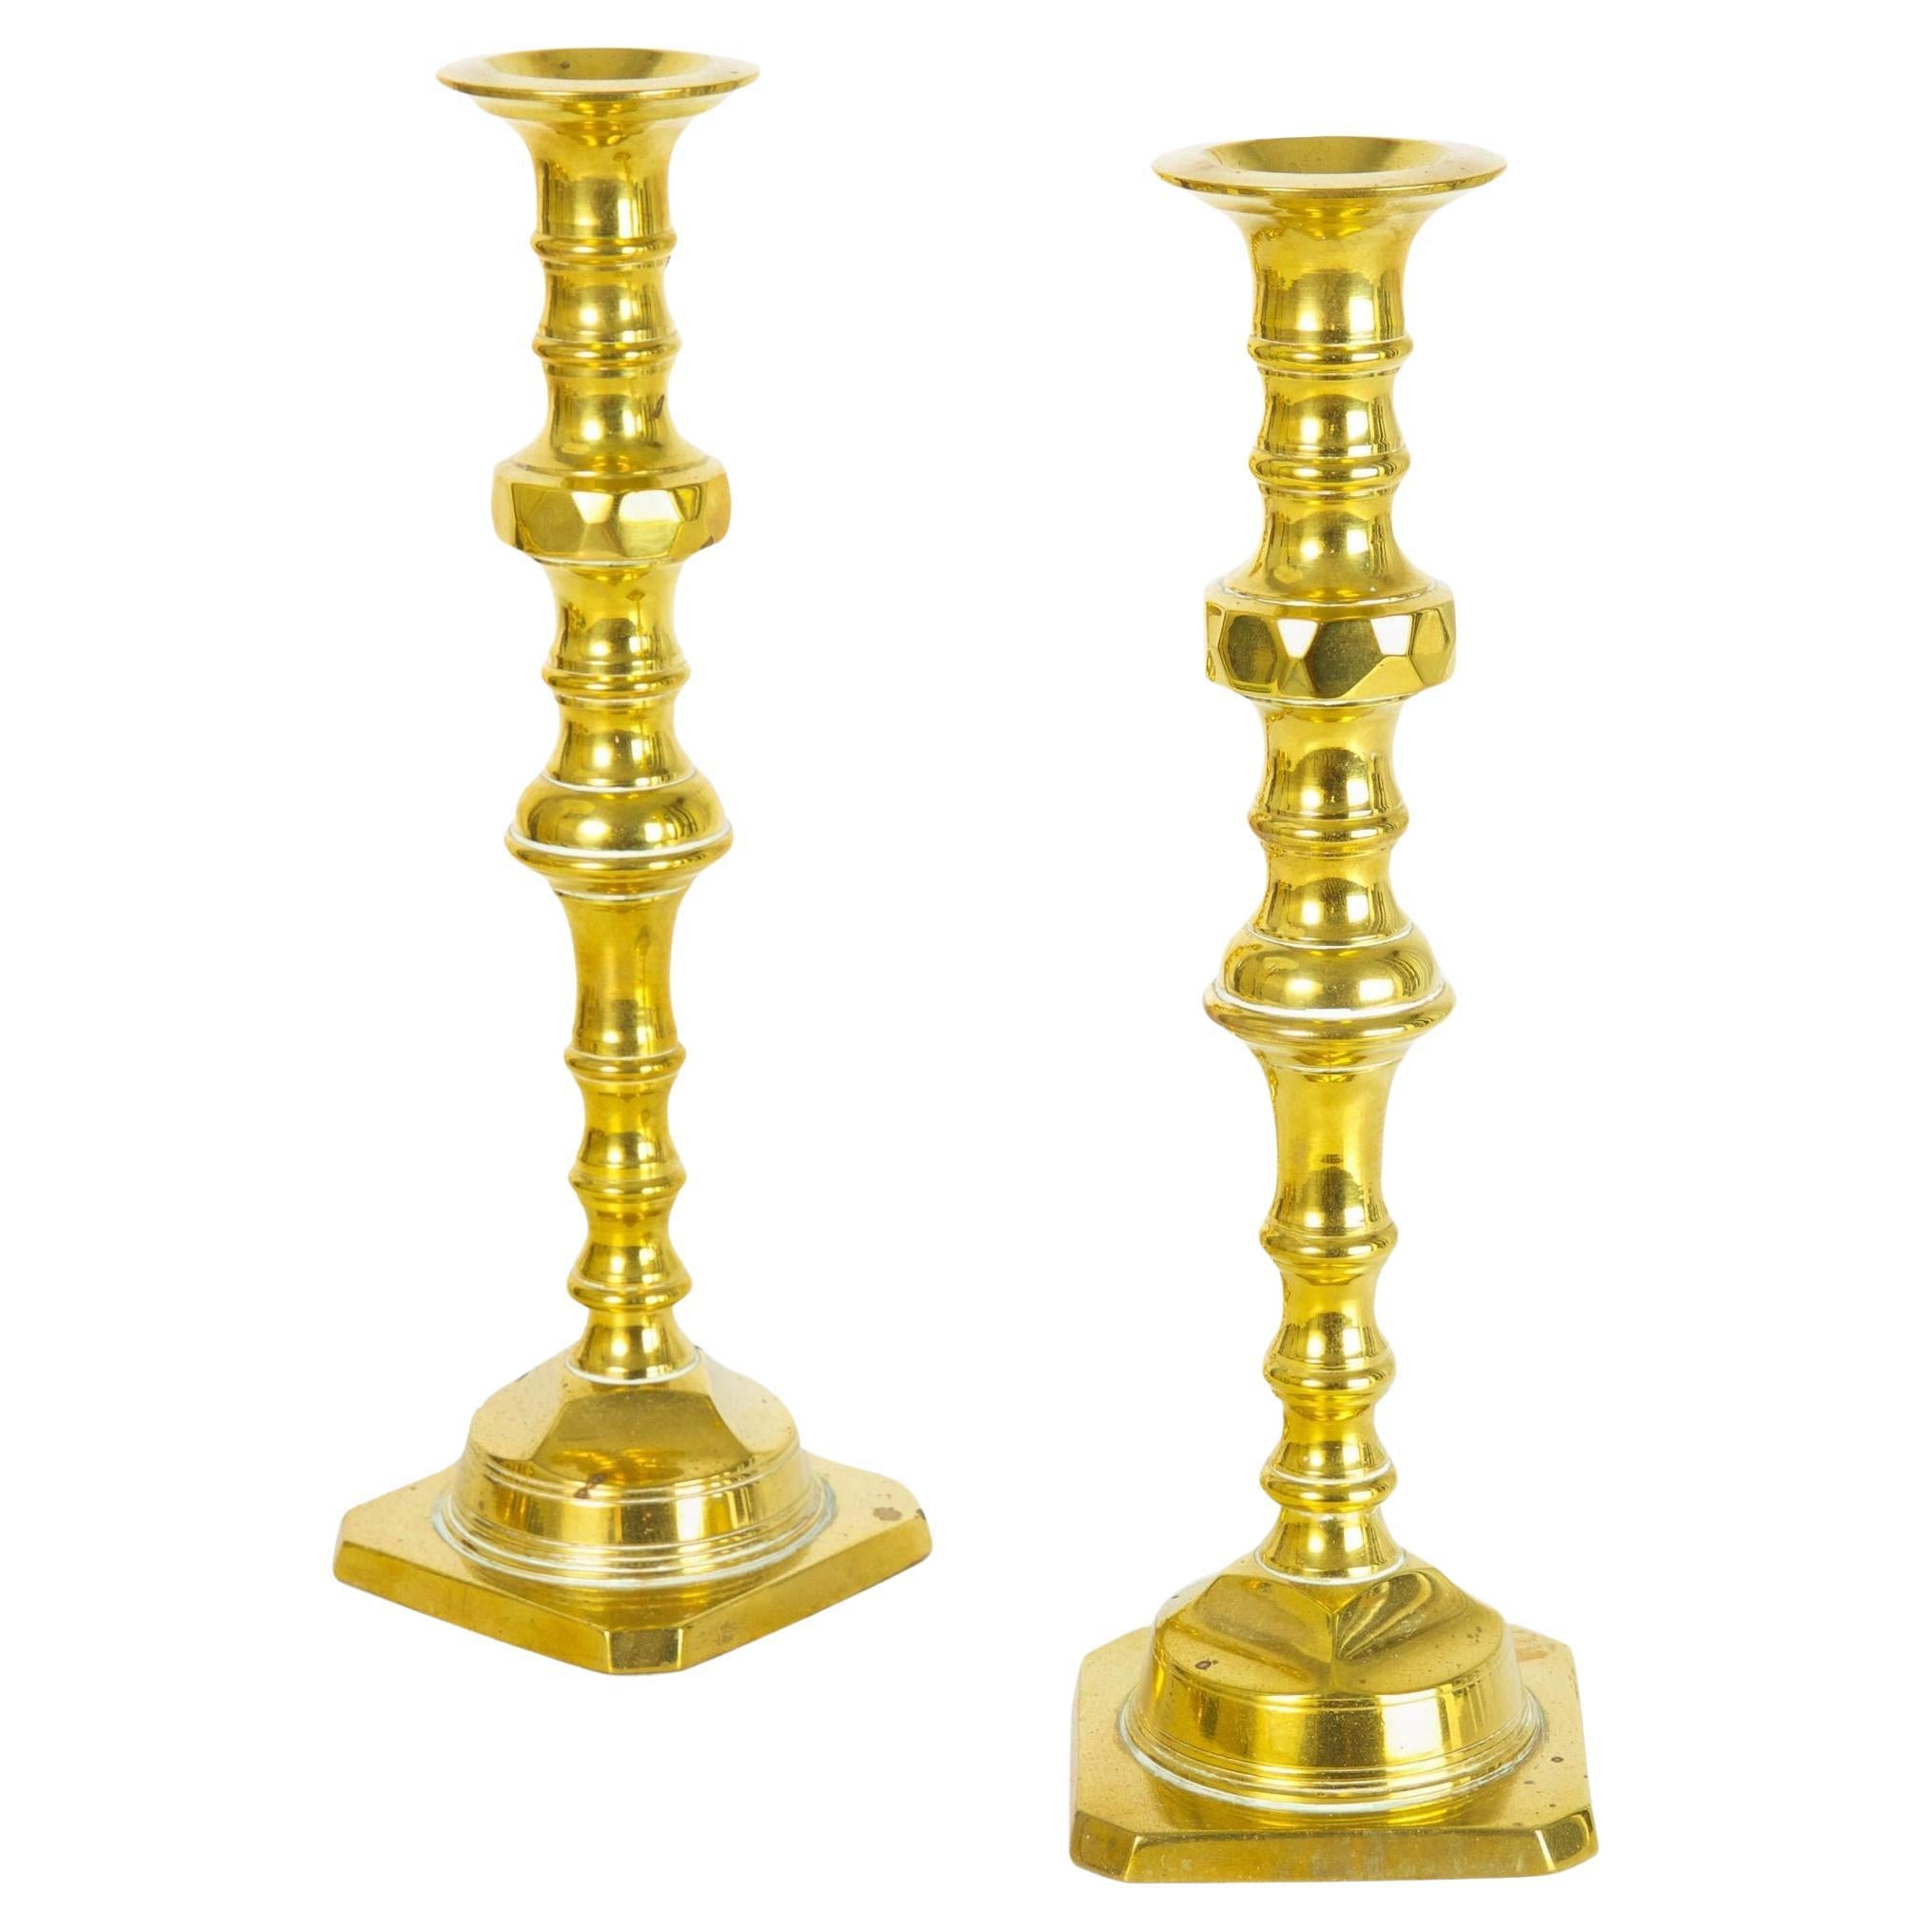 Antique Pair of English Victorian Turned-Brass Candlesticks, 19th Century